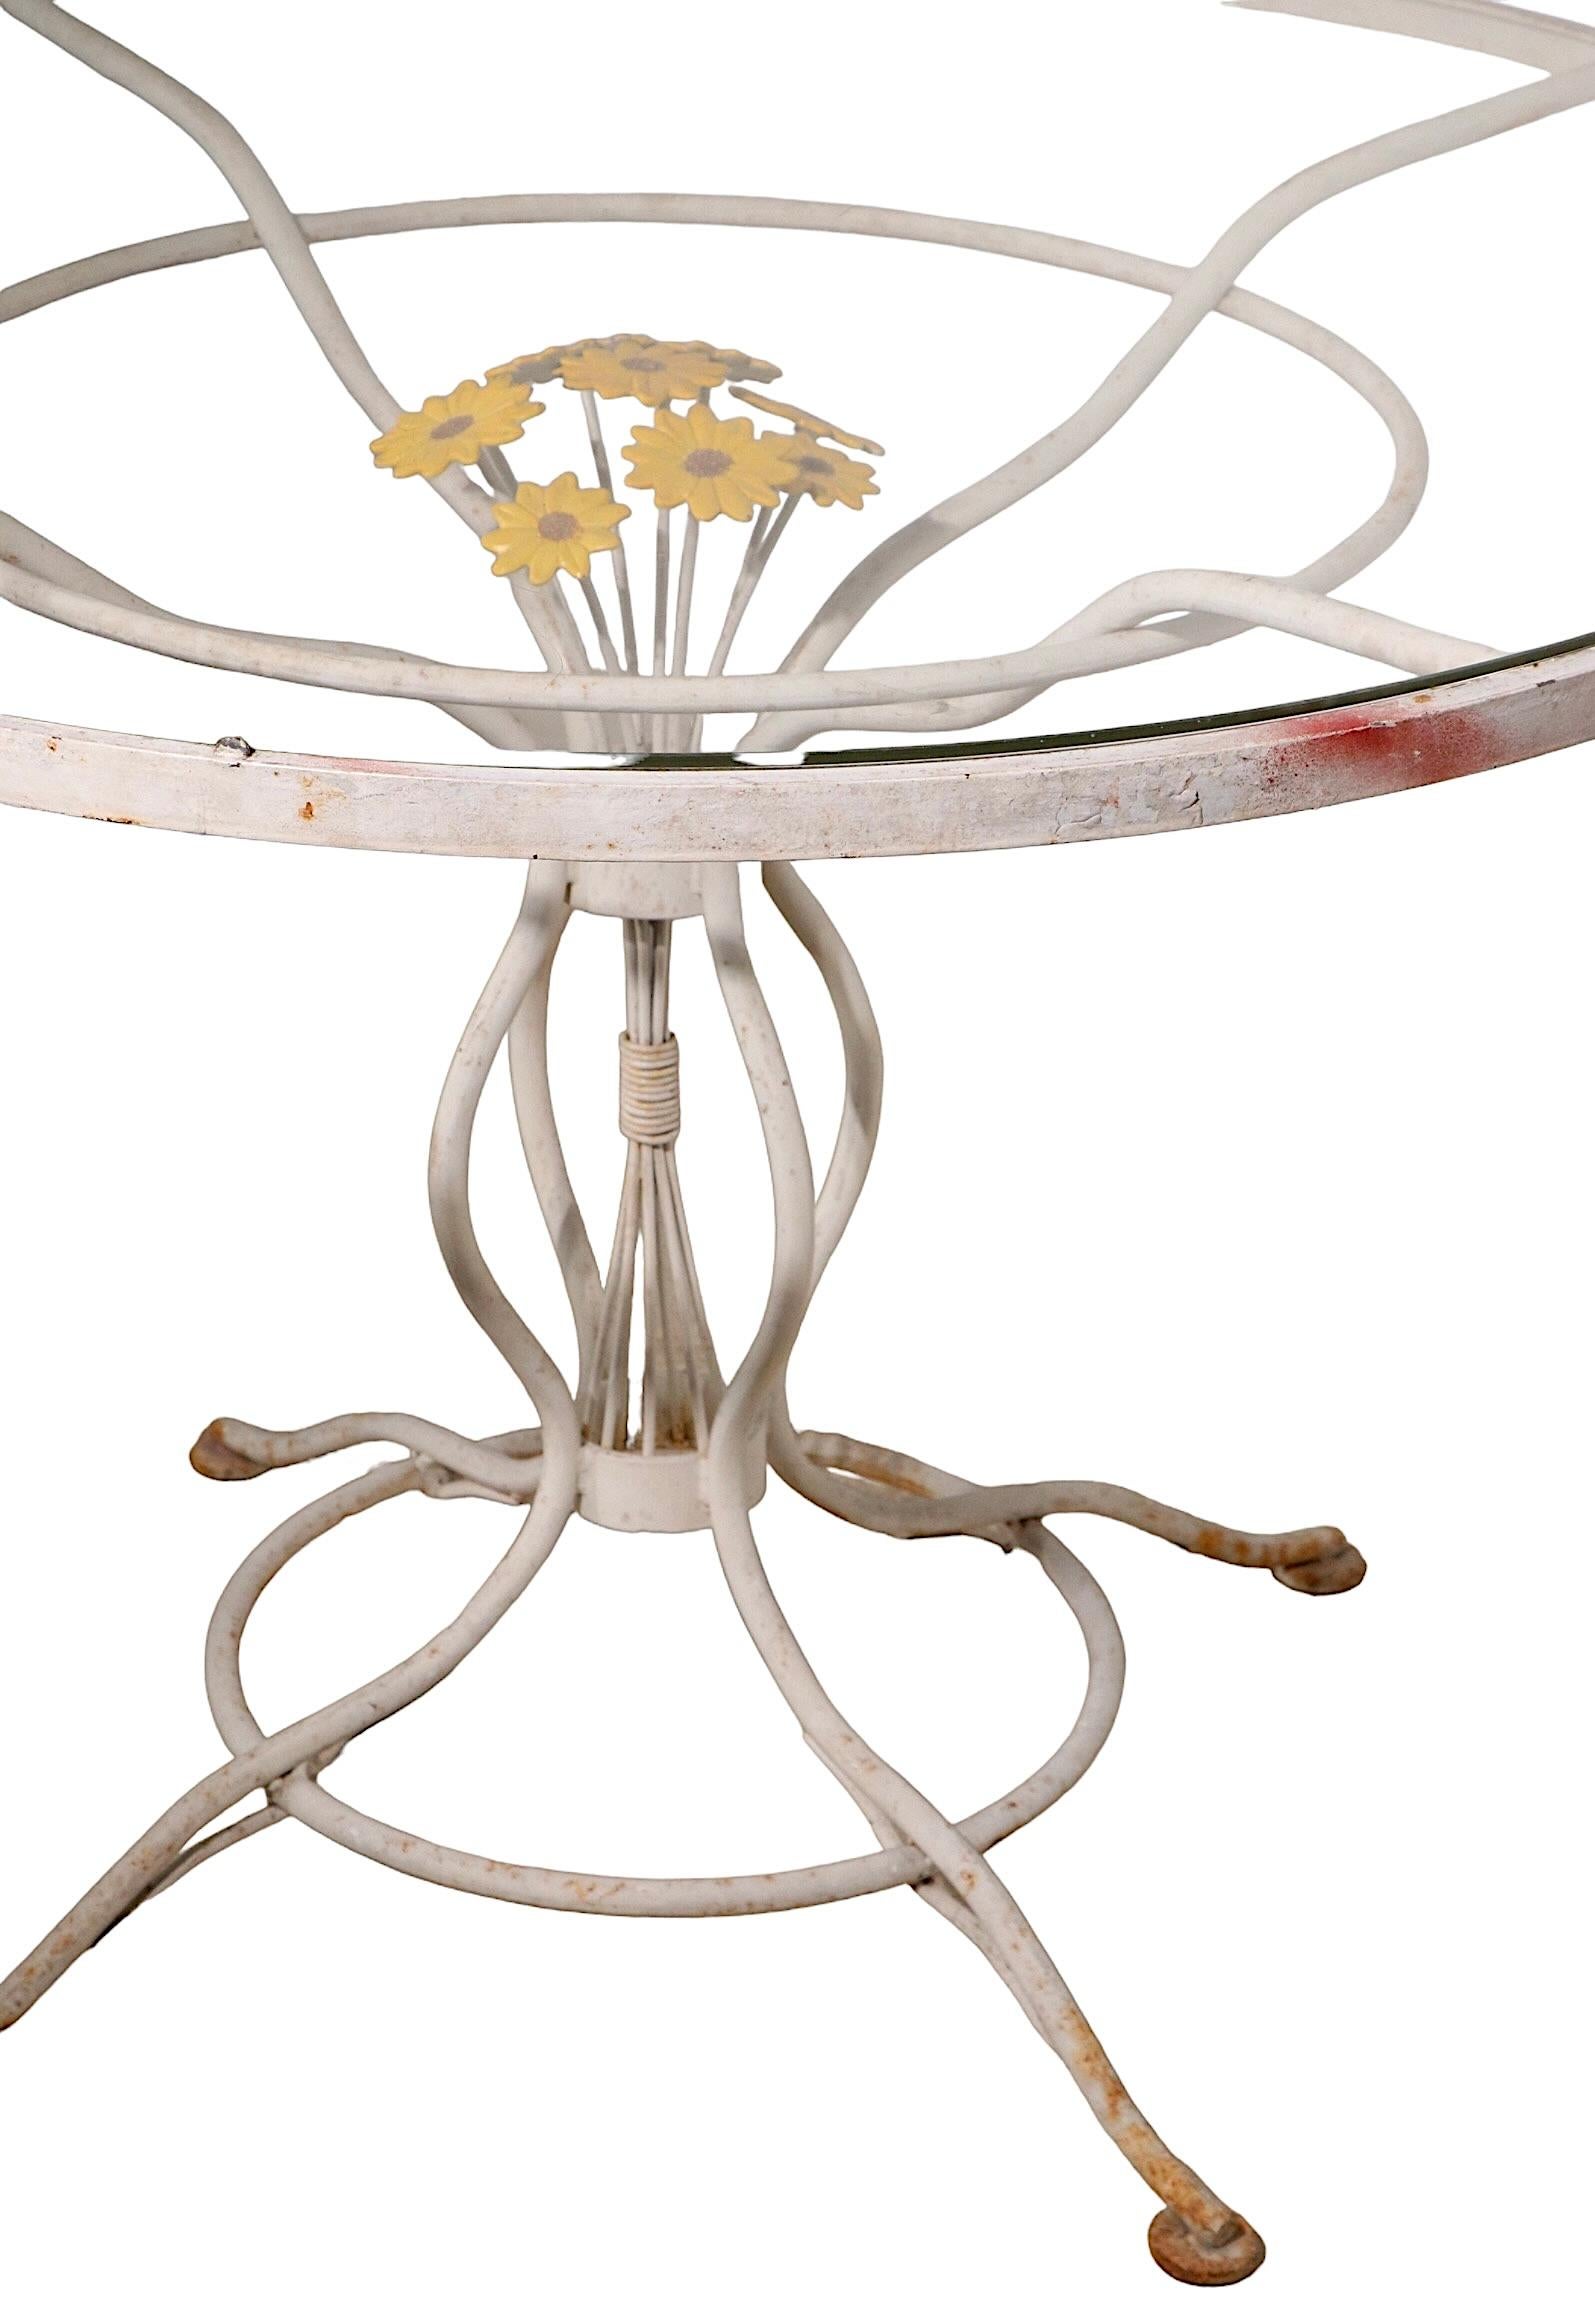 Unusual wrought iron dining, cafe table with glass top. This fun table features a cast metal bouquet of flowers, making it the perfect garden, patio, sunroom or poolside table. The table is in very good original condition, showing only light